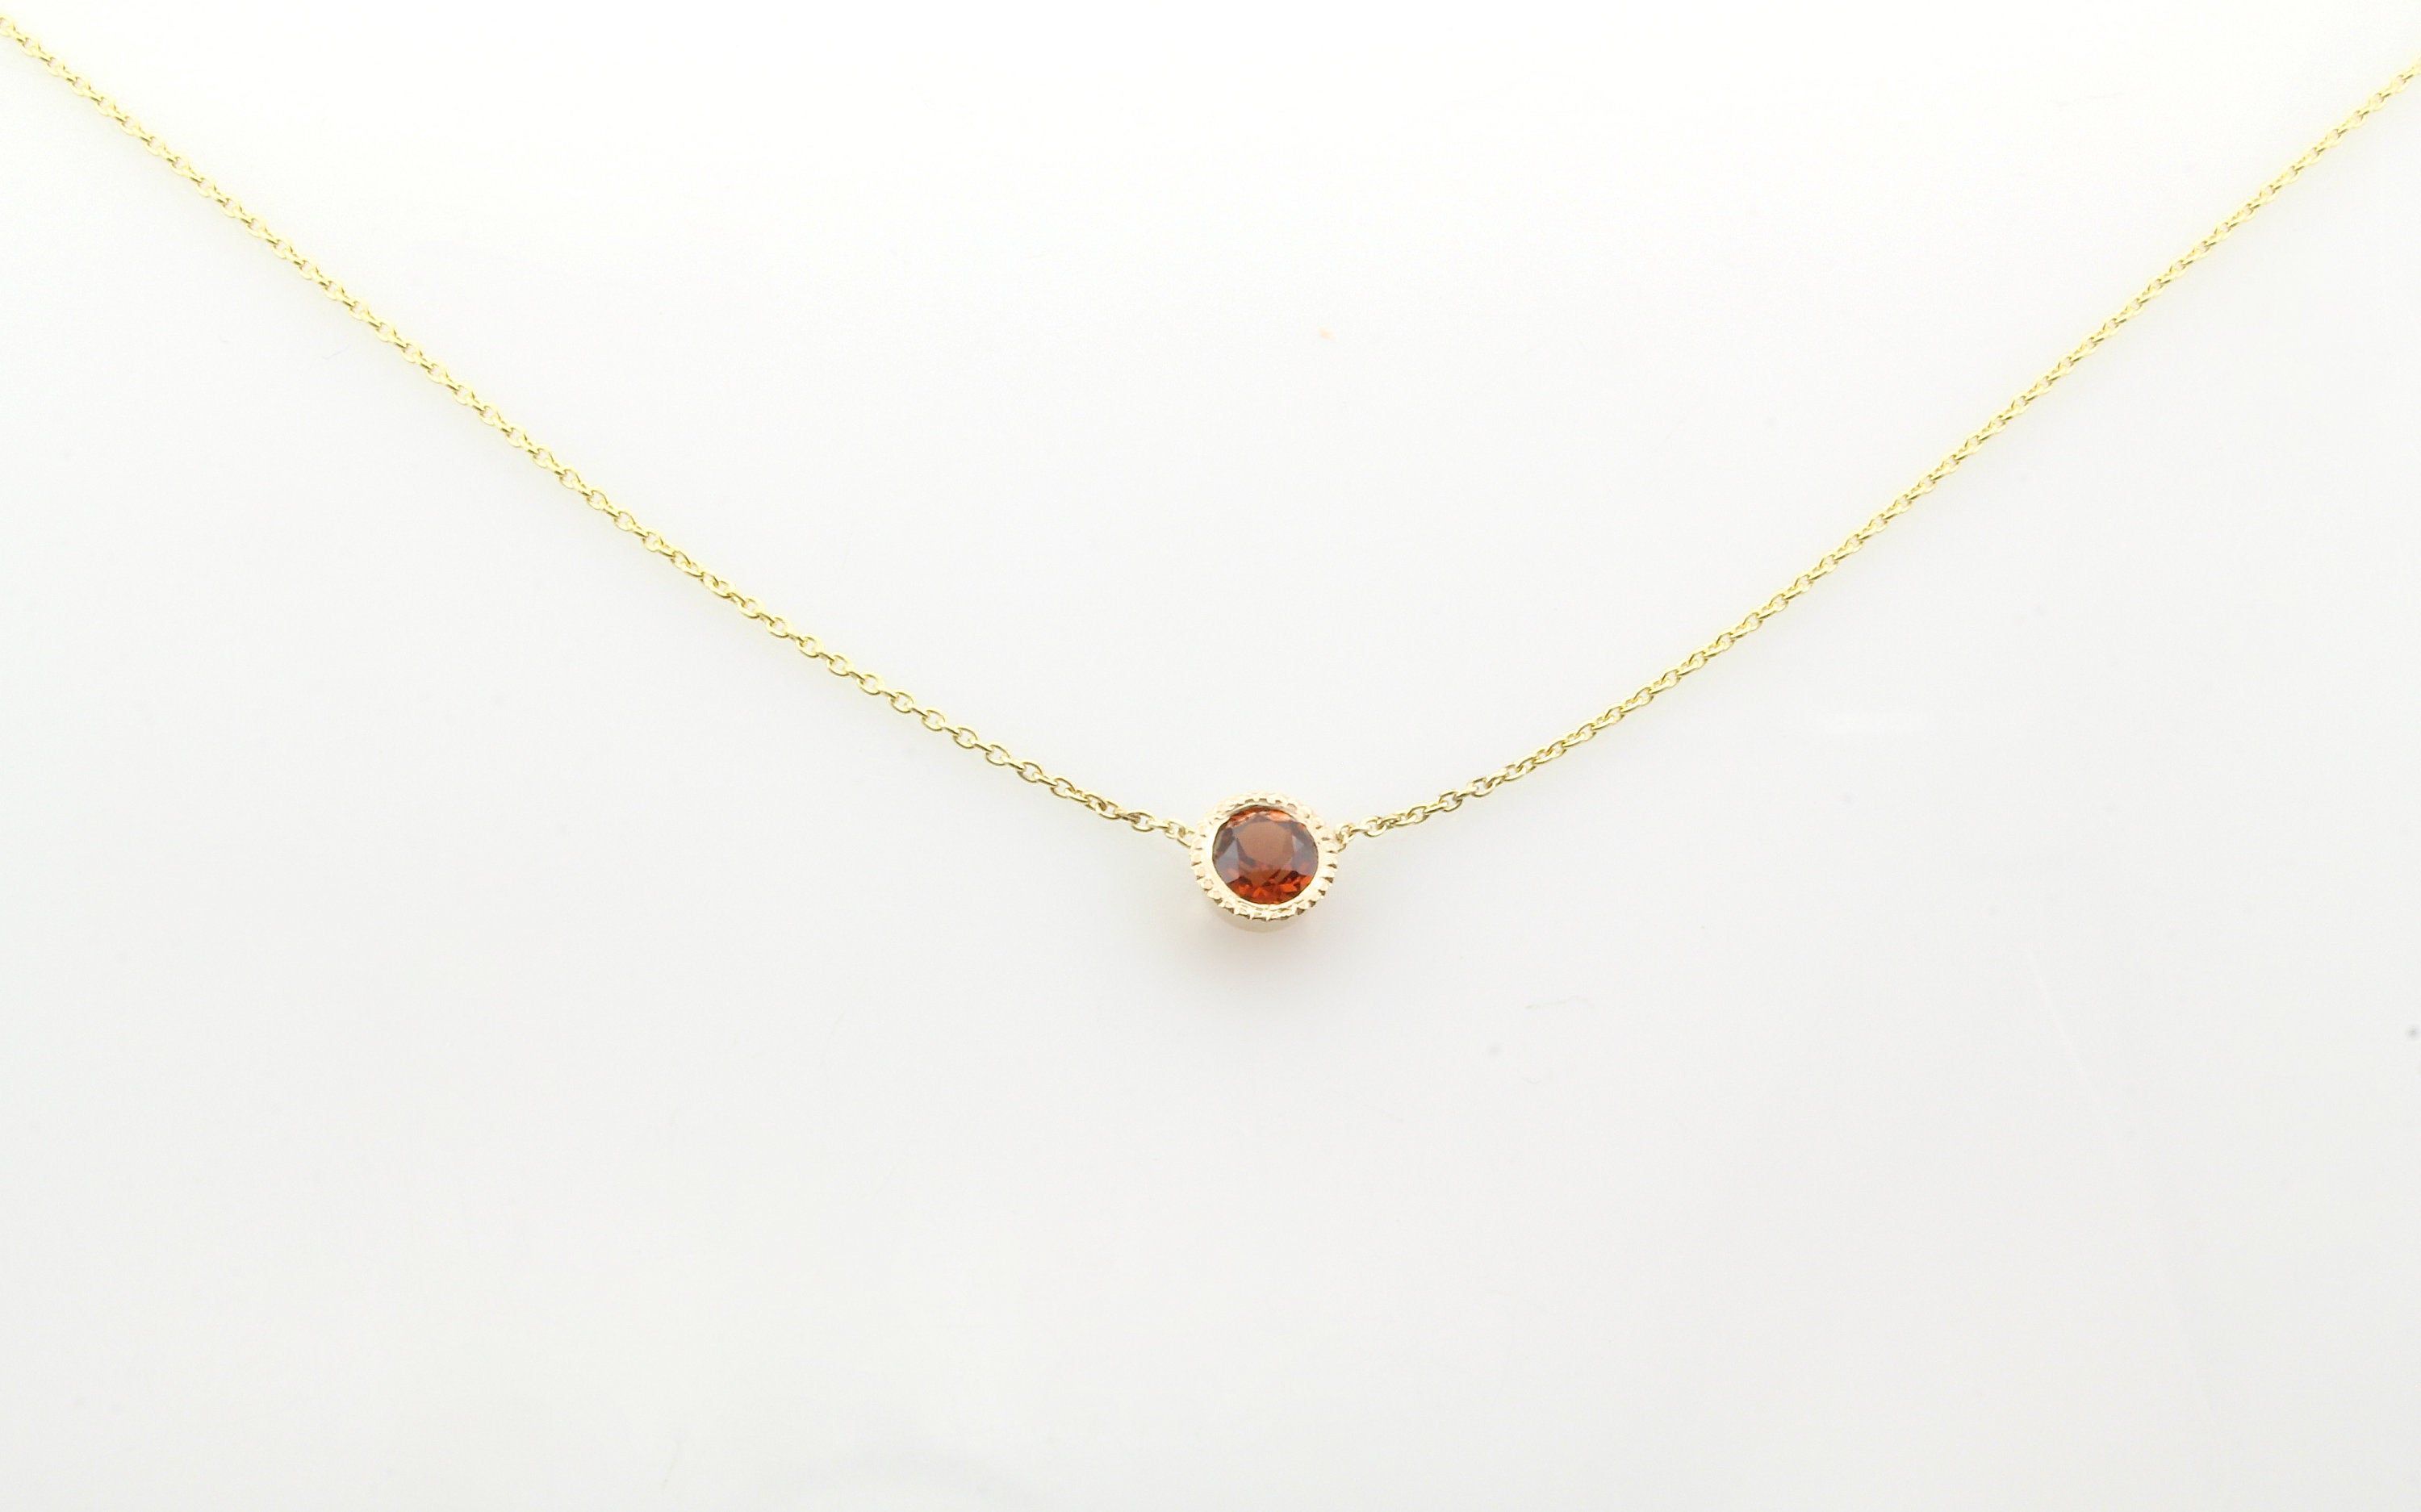 Garnet Necklace, 14k Gold Garnet Necklace, Solitaire Garnet, January  Birthstone, Solid Gold, Graduation Gift, For Her, Brookemicheledesigns Throughout Best And Newest Garnet January Droplet Pendant Necklaces (View 20 of 25)